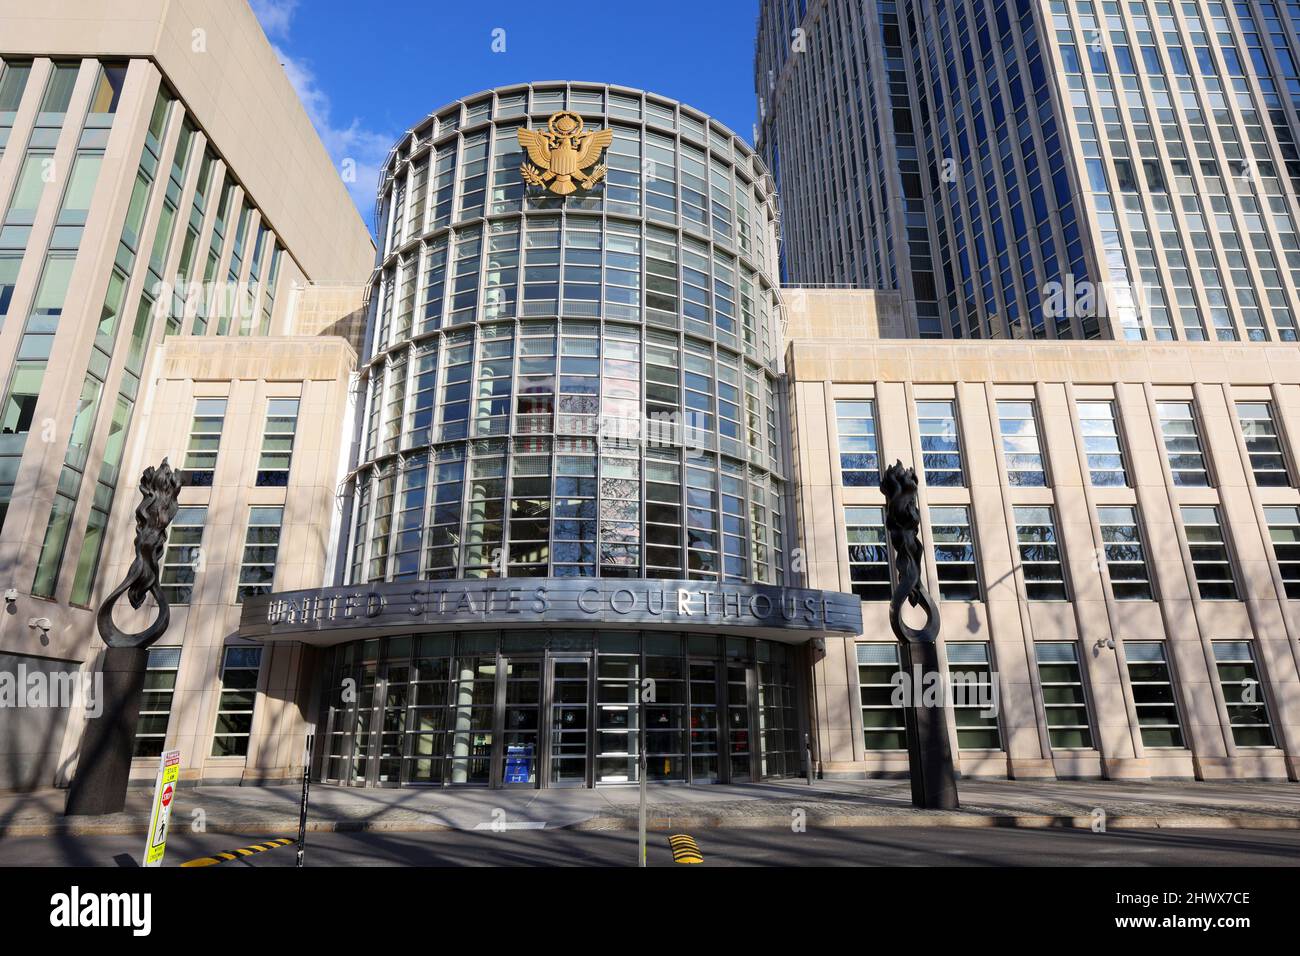 United States District Court for the Eastern District of New York, 225 Cadman Plaza E, Brooklyn, NYC Schaufensterfoto des Brooklyn Federal Court House. Stockfoto